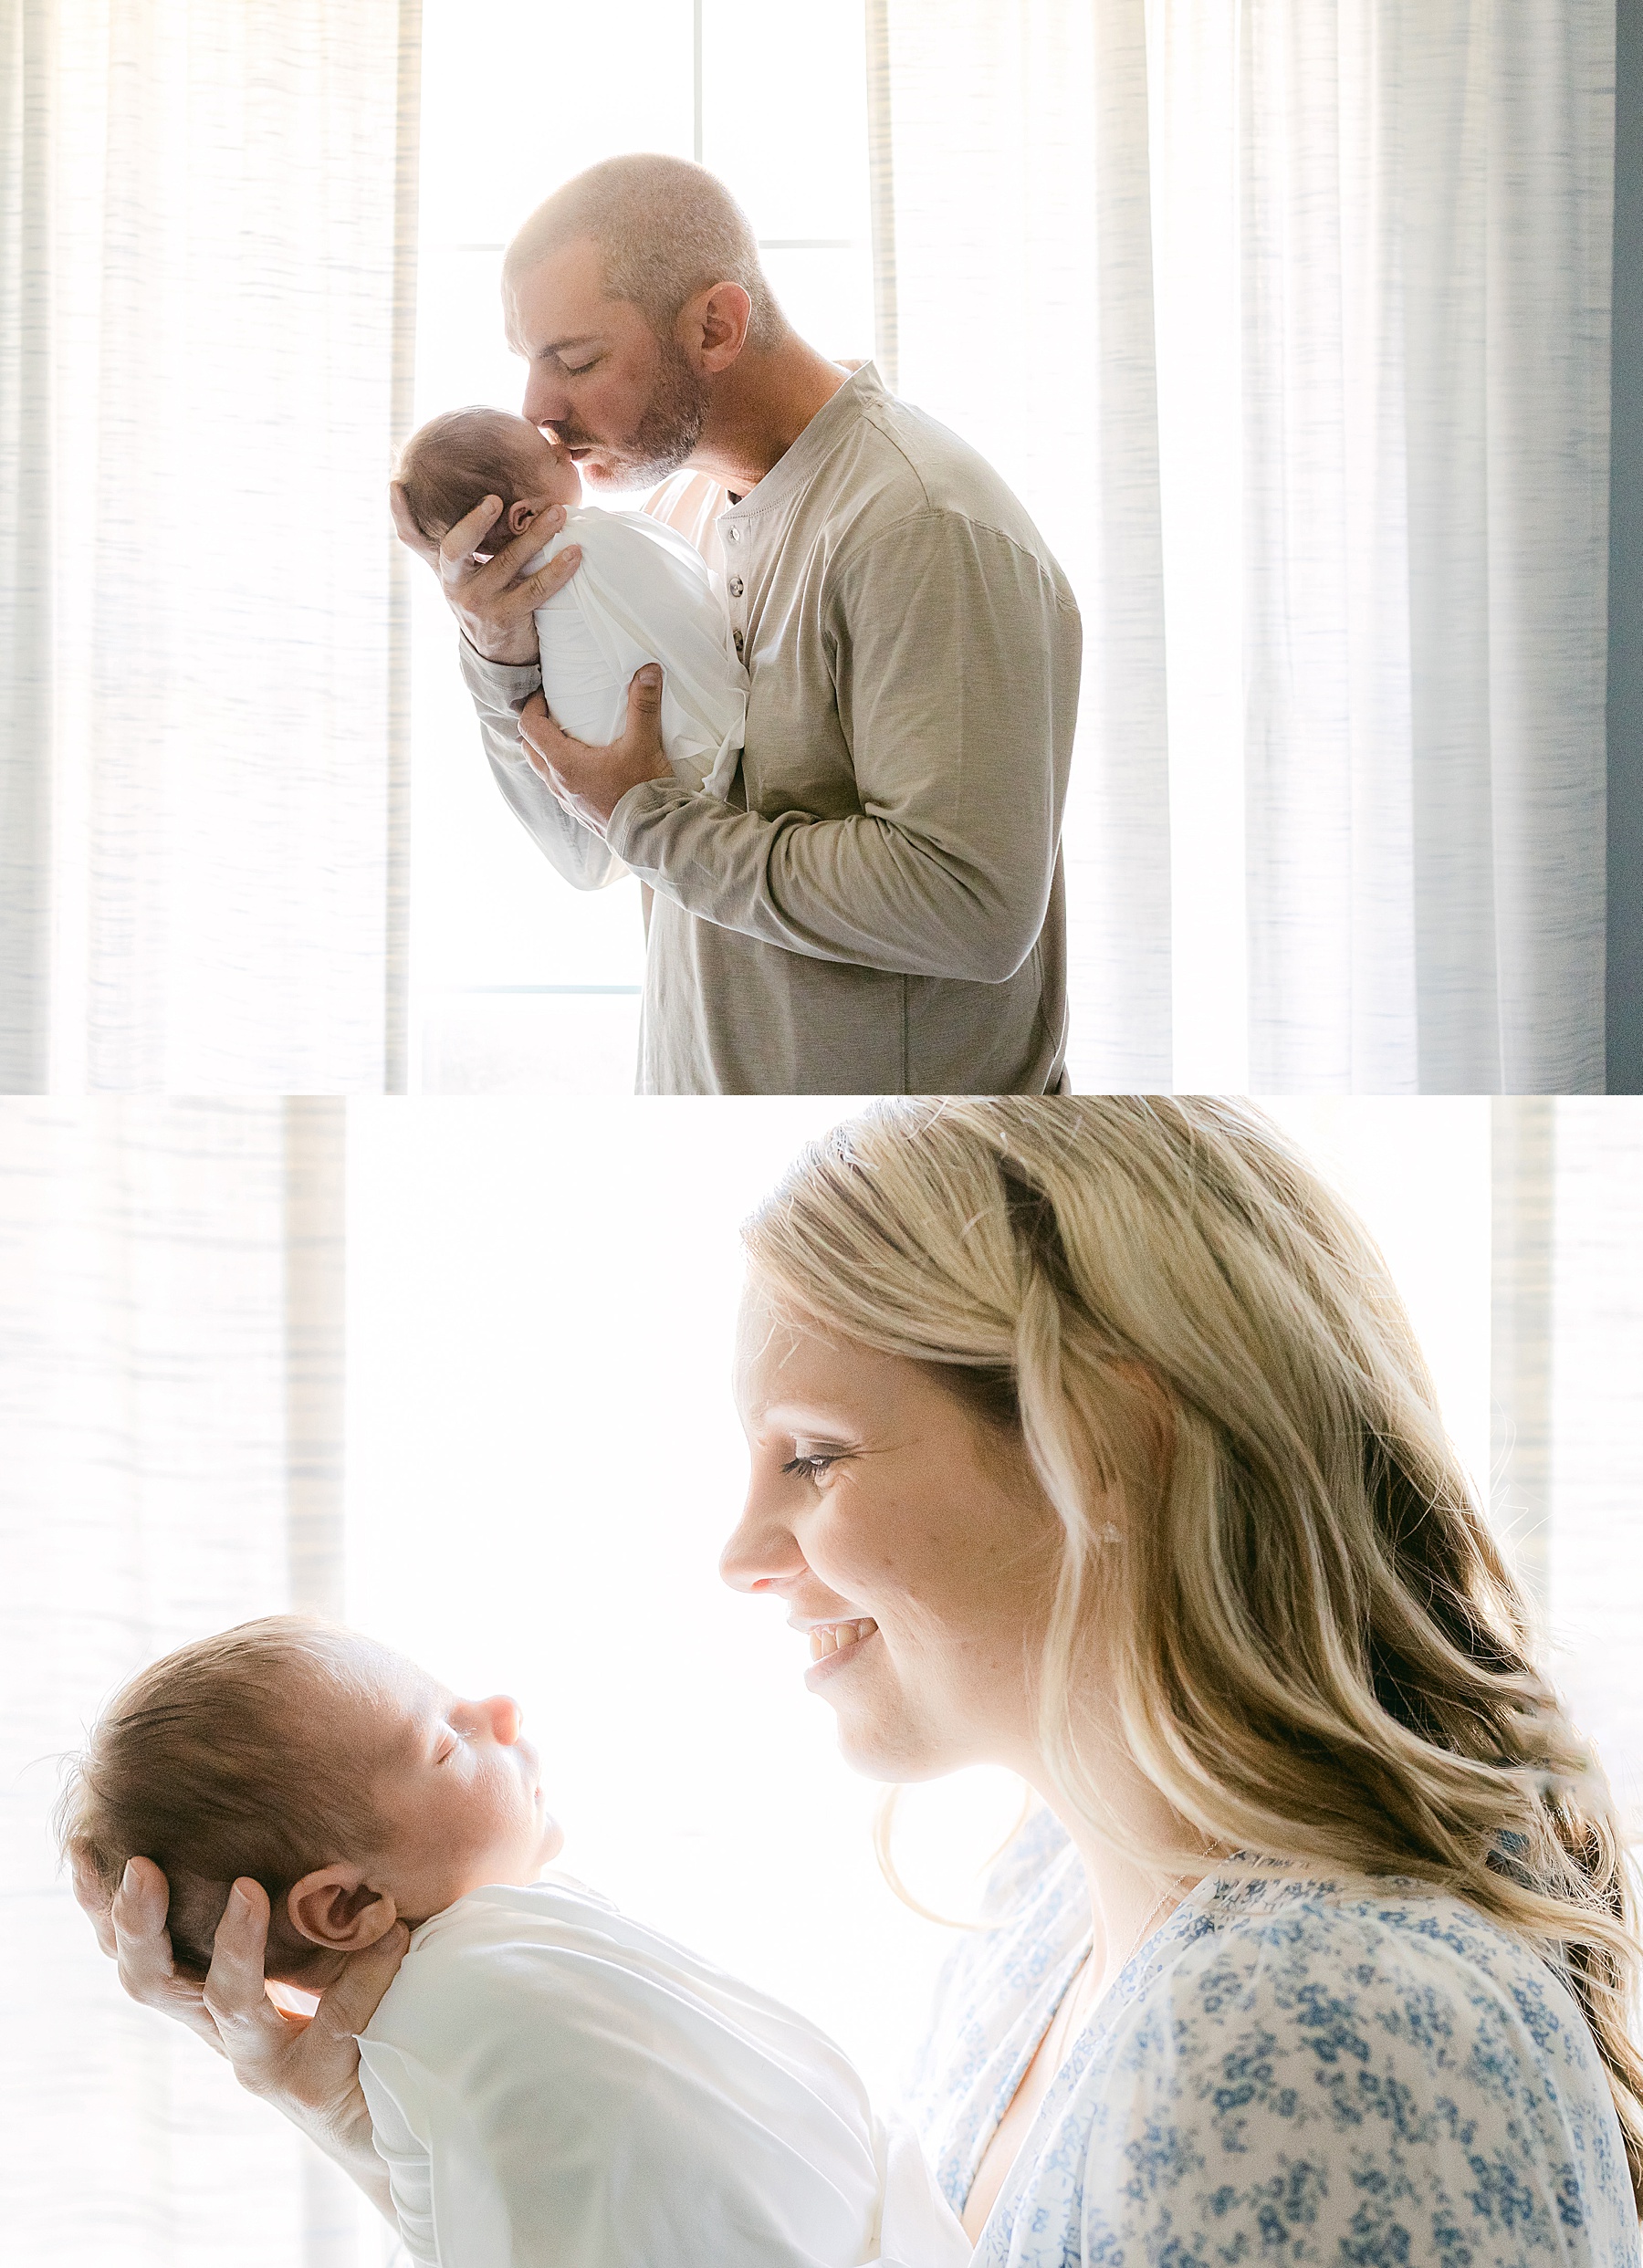 man and a woman holding a newborn baby in front of an airy window backlit